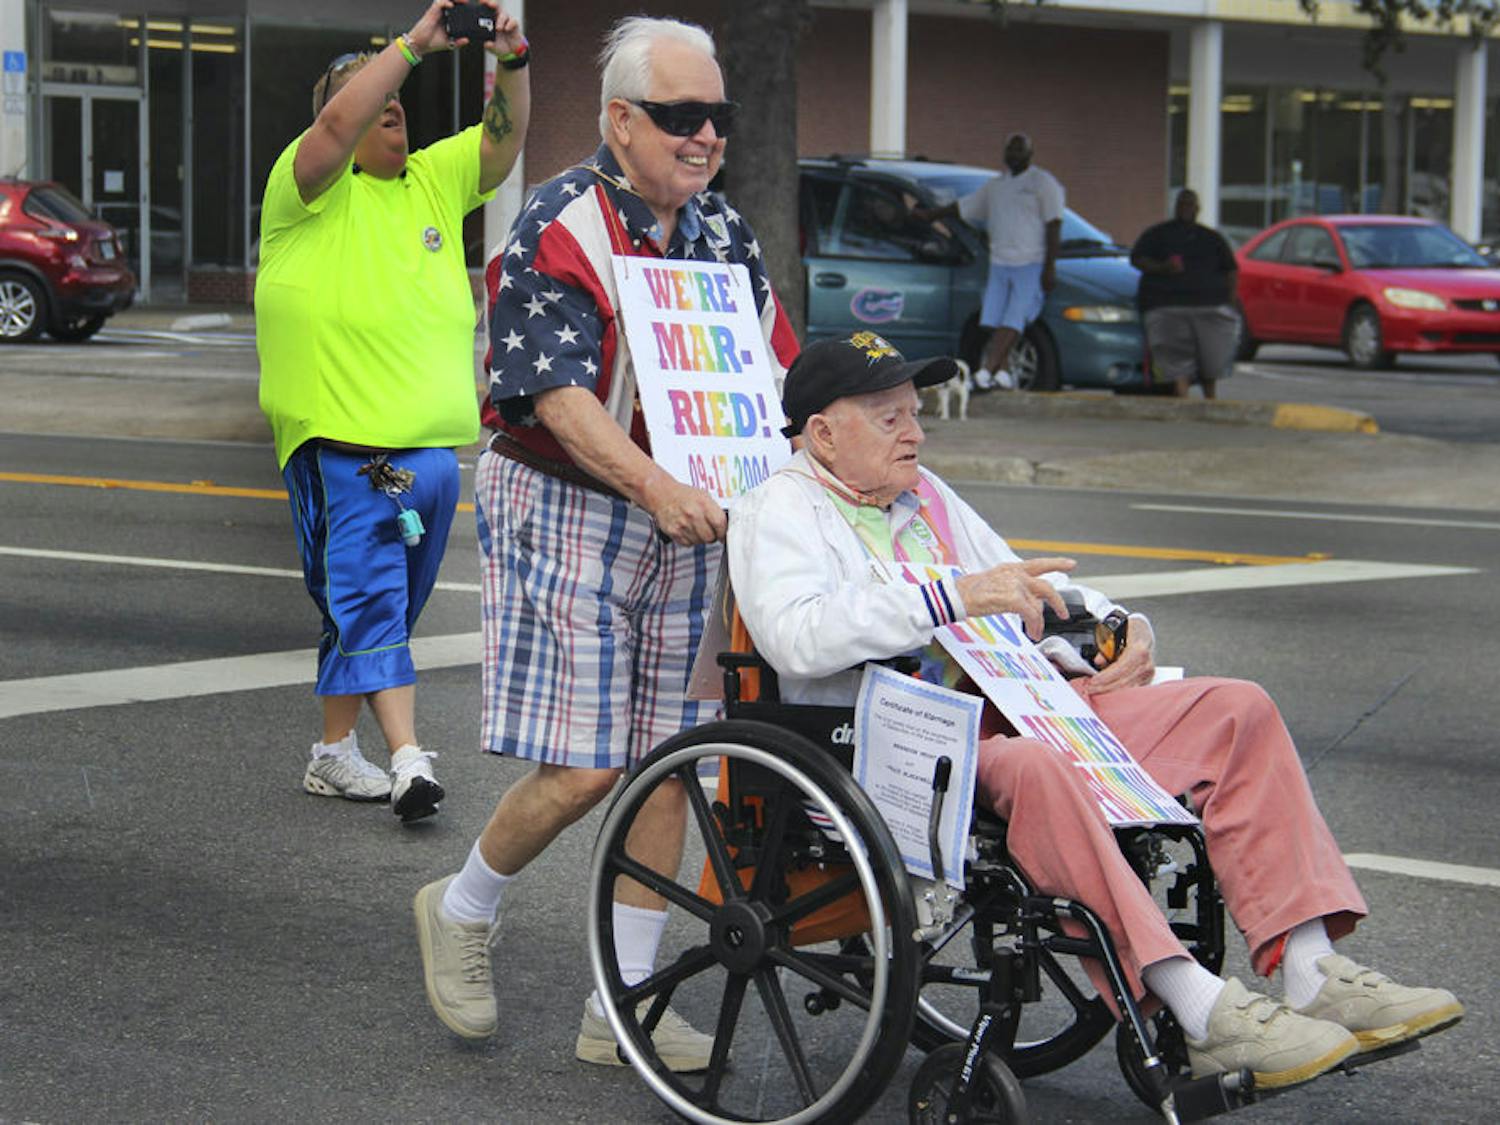 Bruce Blackwell (left) and Brandy Wight celebrate marriage equality in the Gainesville Pride Parade and Festival on Oct. 24, 2015. The two have been a couple since 1966 and got married in Martha’s Vineyard on Sept. 17, 2004. This year is special for them not only because of the Supreme Court’s ruling for marriage equality, but also because Wight is 100 years old.